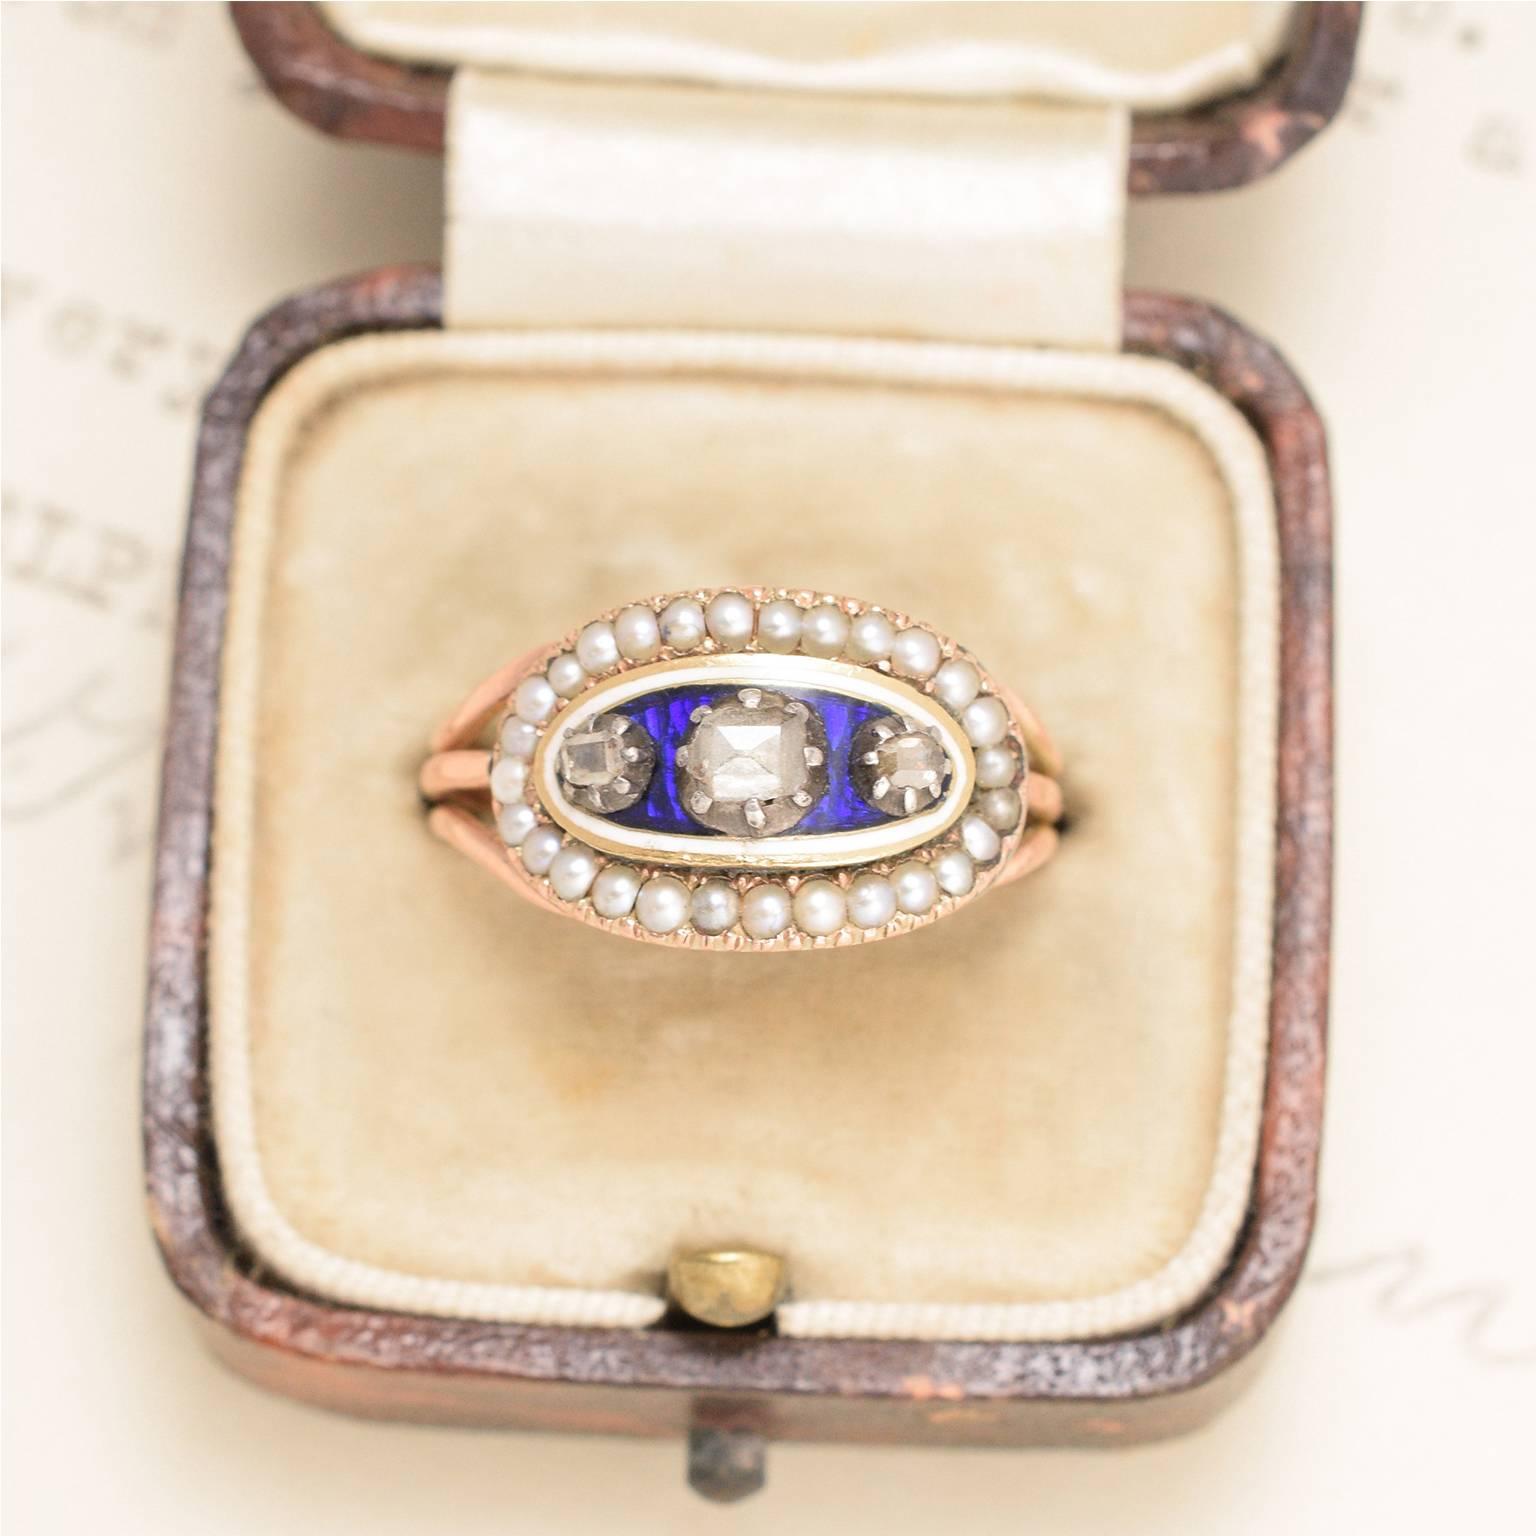 Women's Georgian Blue Enamel and Table Cut Diamond Ring with Seed Pearl Border